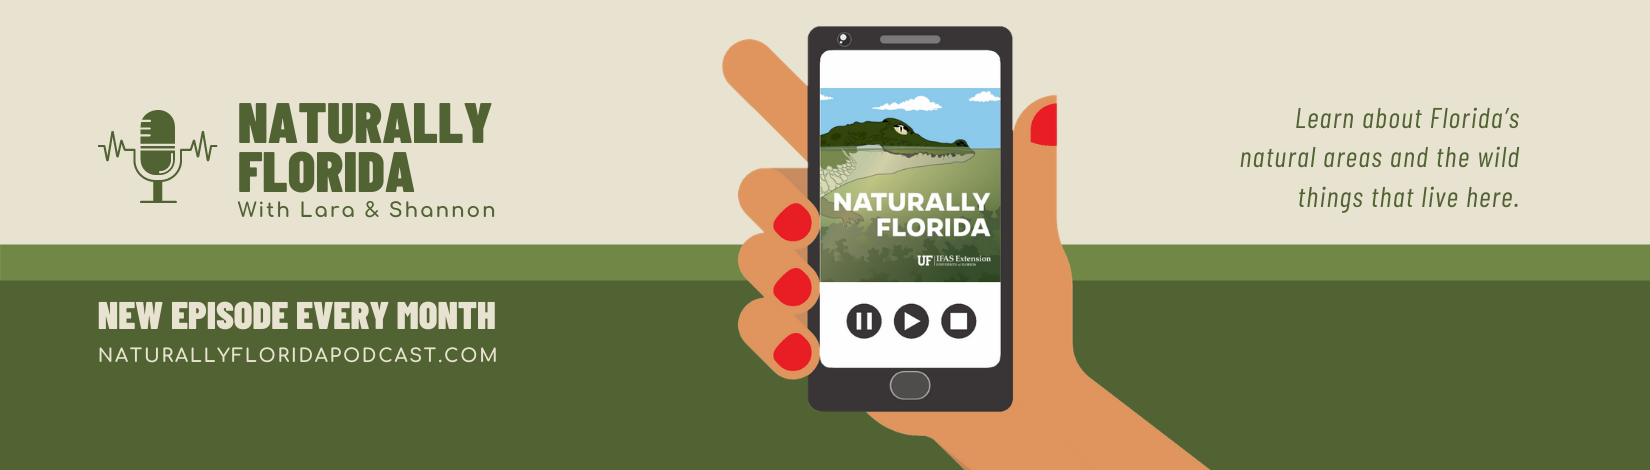 A cartoon hand with red nail polish holds a cellphone showing the Naturally Florida podcast logo. Th text reads, Naturally Florida with Lara and Shannon. New episode every month. www.naturallyfloridapodcast.com. Learn about Florida's natural areas and the wild things that live here.